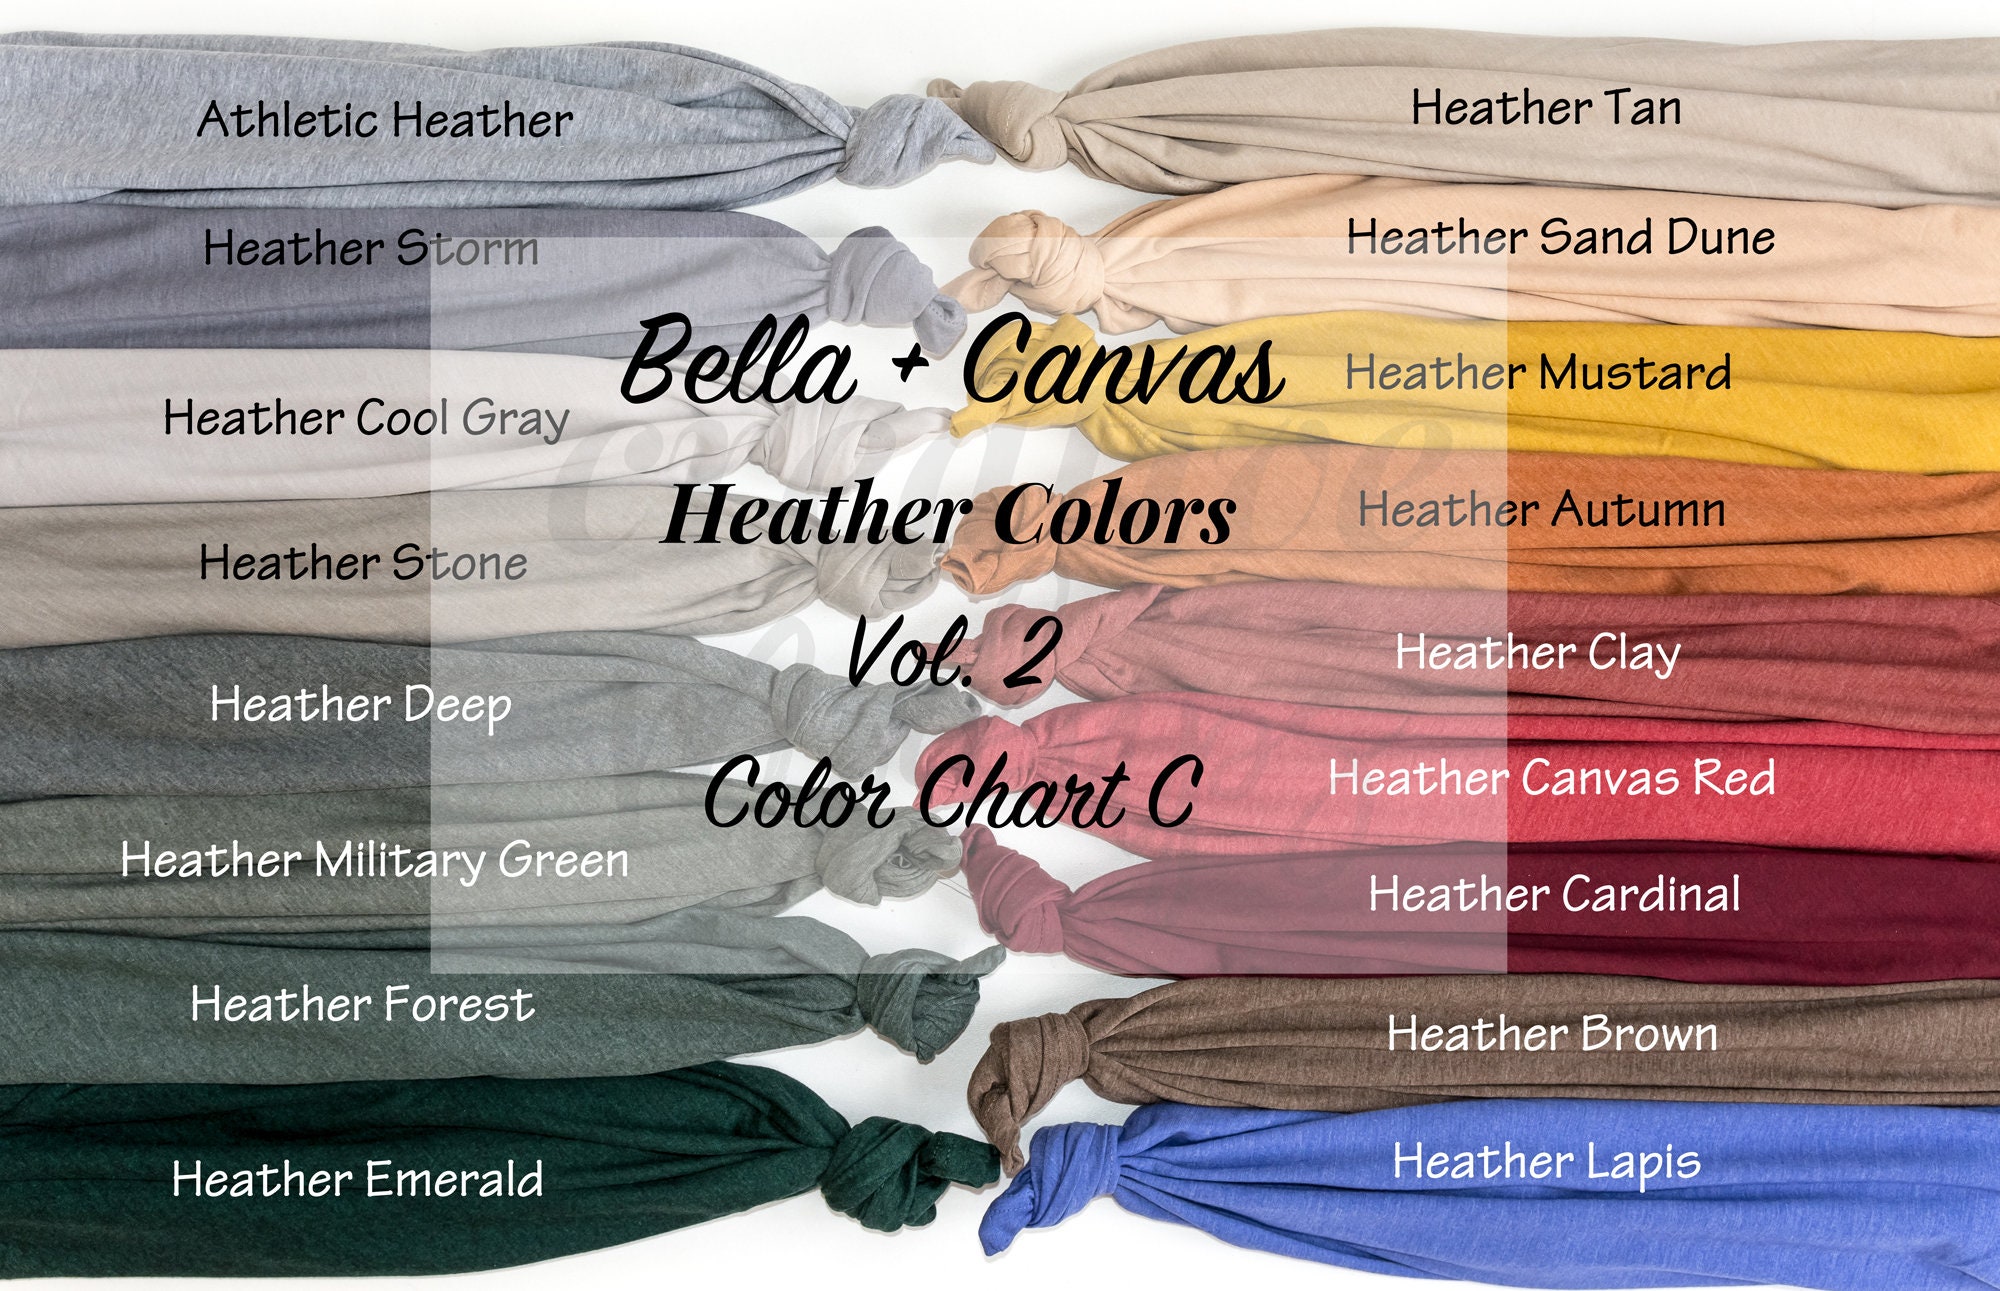 Bella Canvas Heather Colors 3001CVC Color Chart Vol. 2-C Out of A,B & C /  Knotted Shirts Color Swatch 2 Photos Included With and No Names 